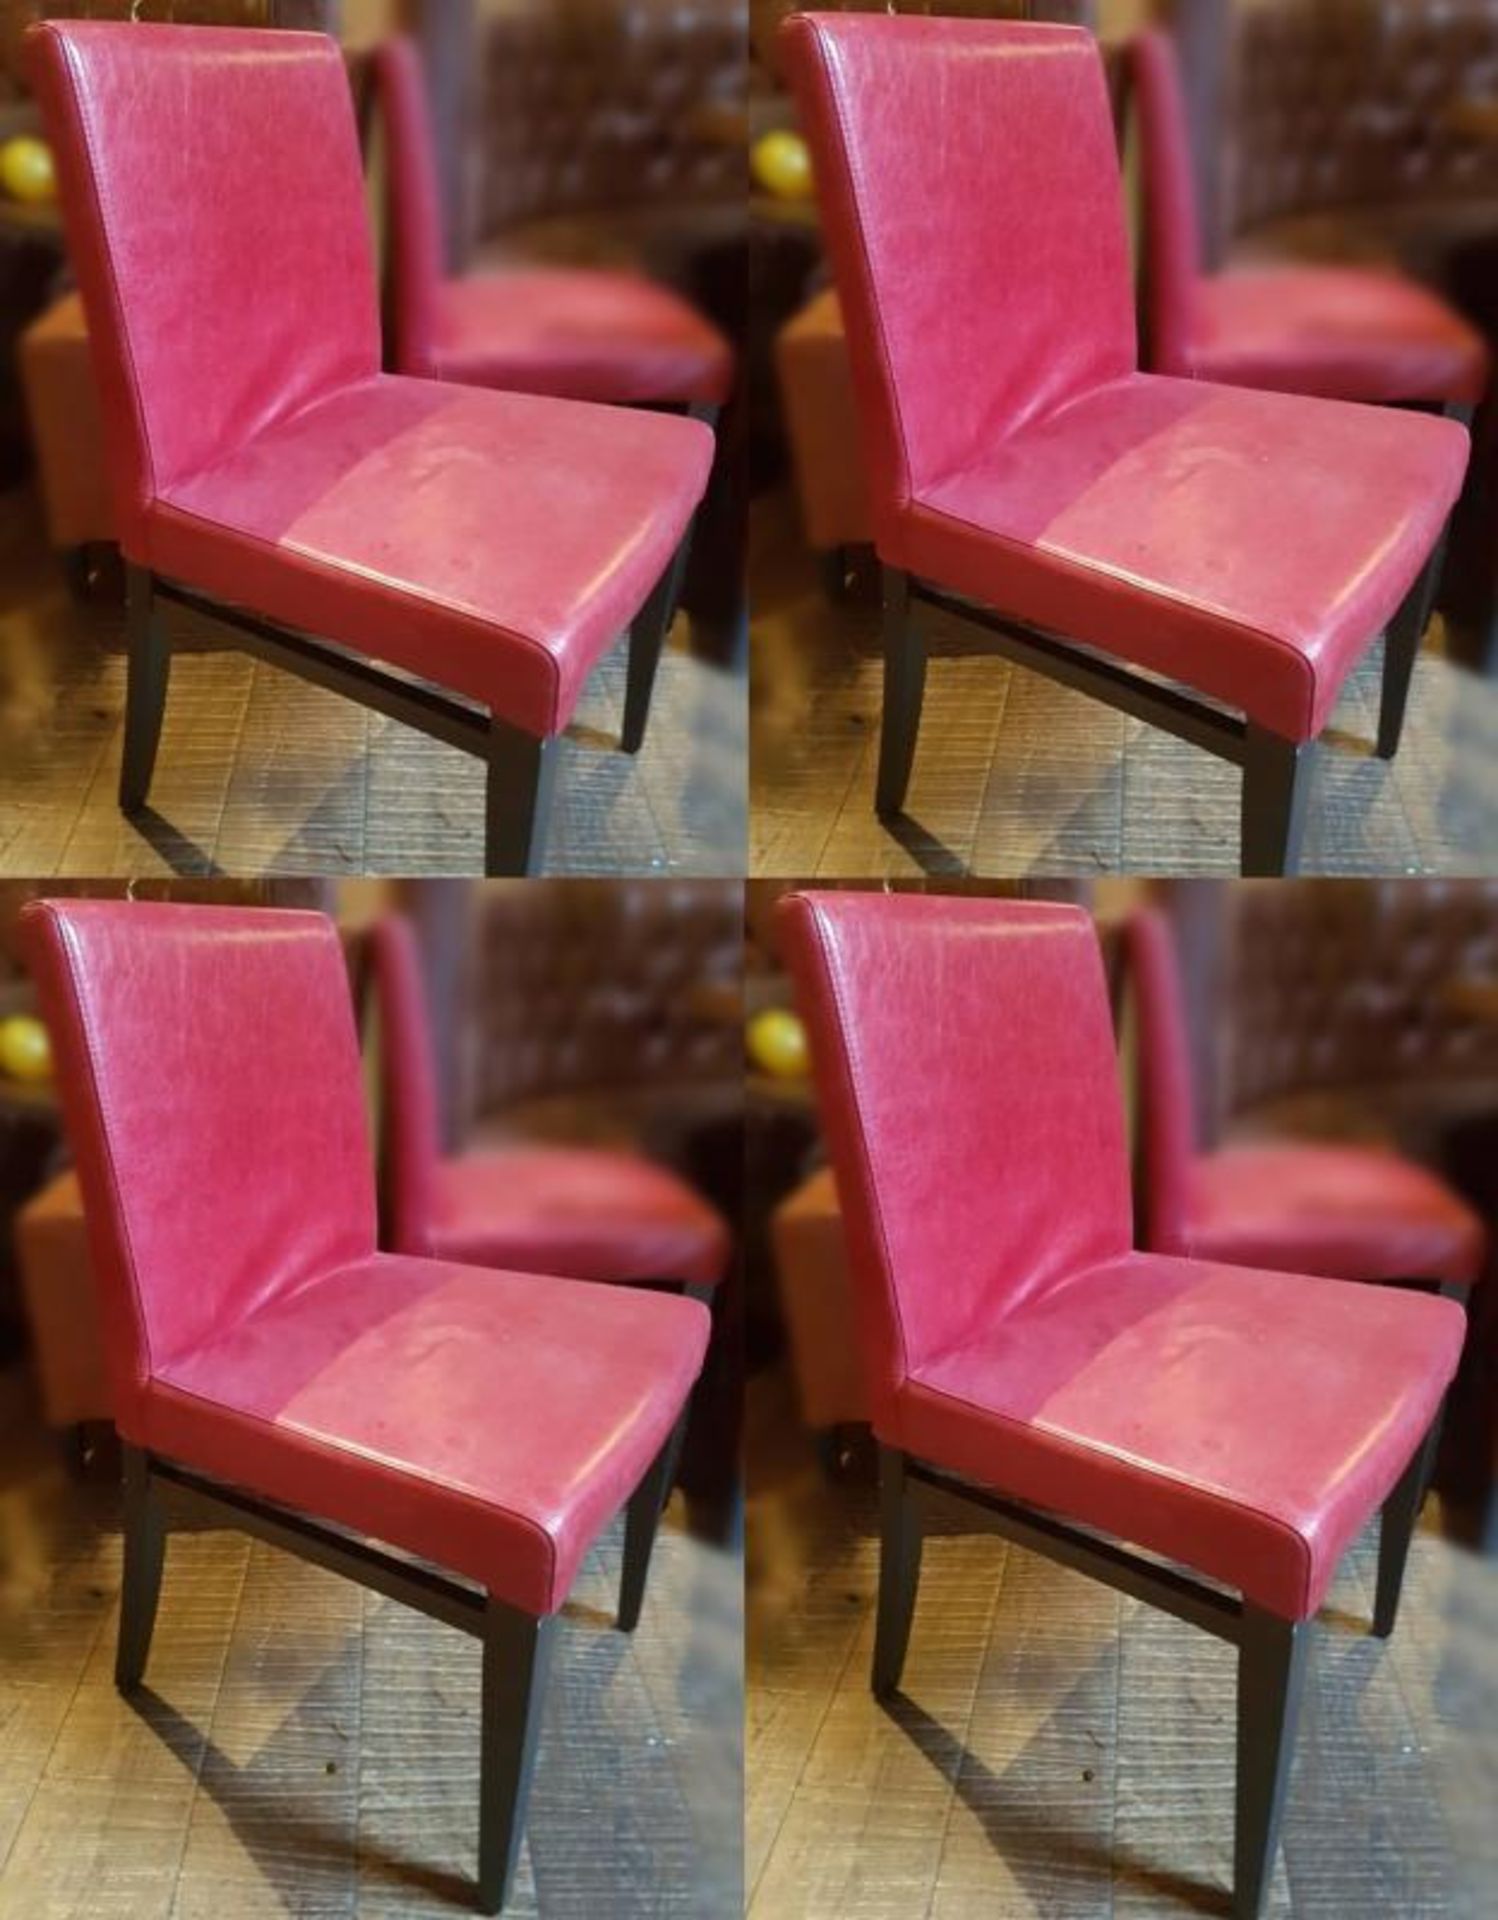 4 x Hard-wearing Red Leather Upholstered Commercial Dining Chairs - Recently Removed From A City Cen